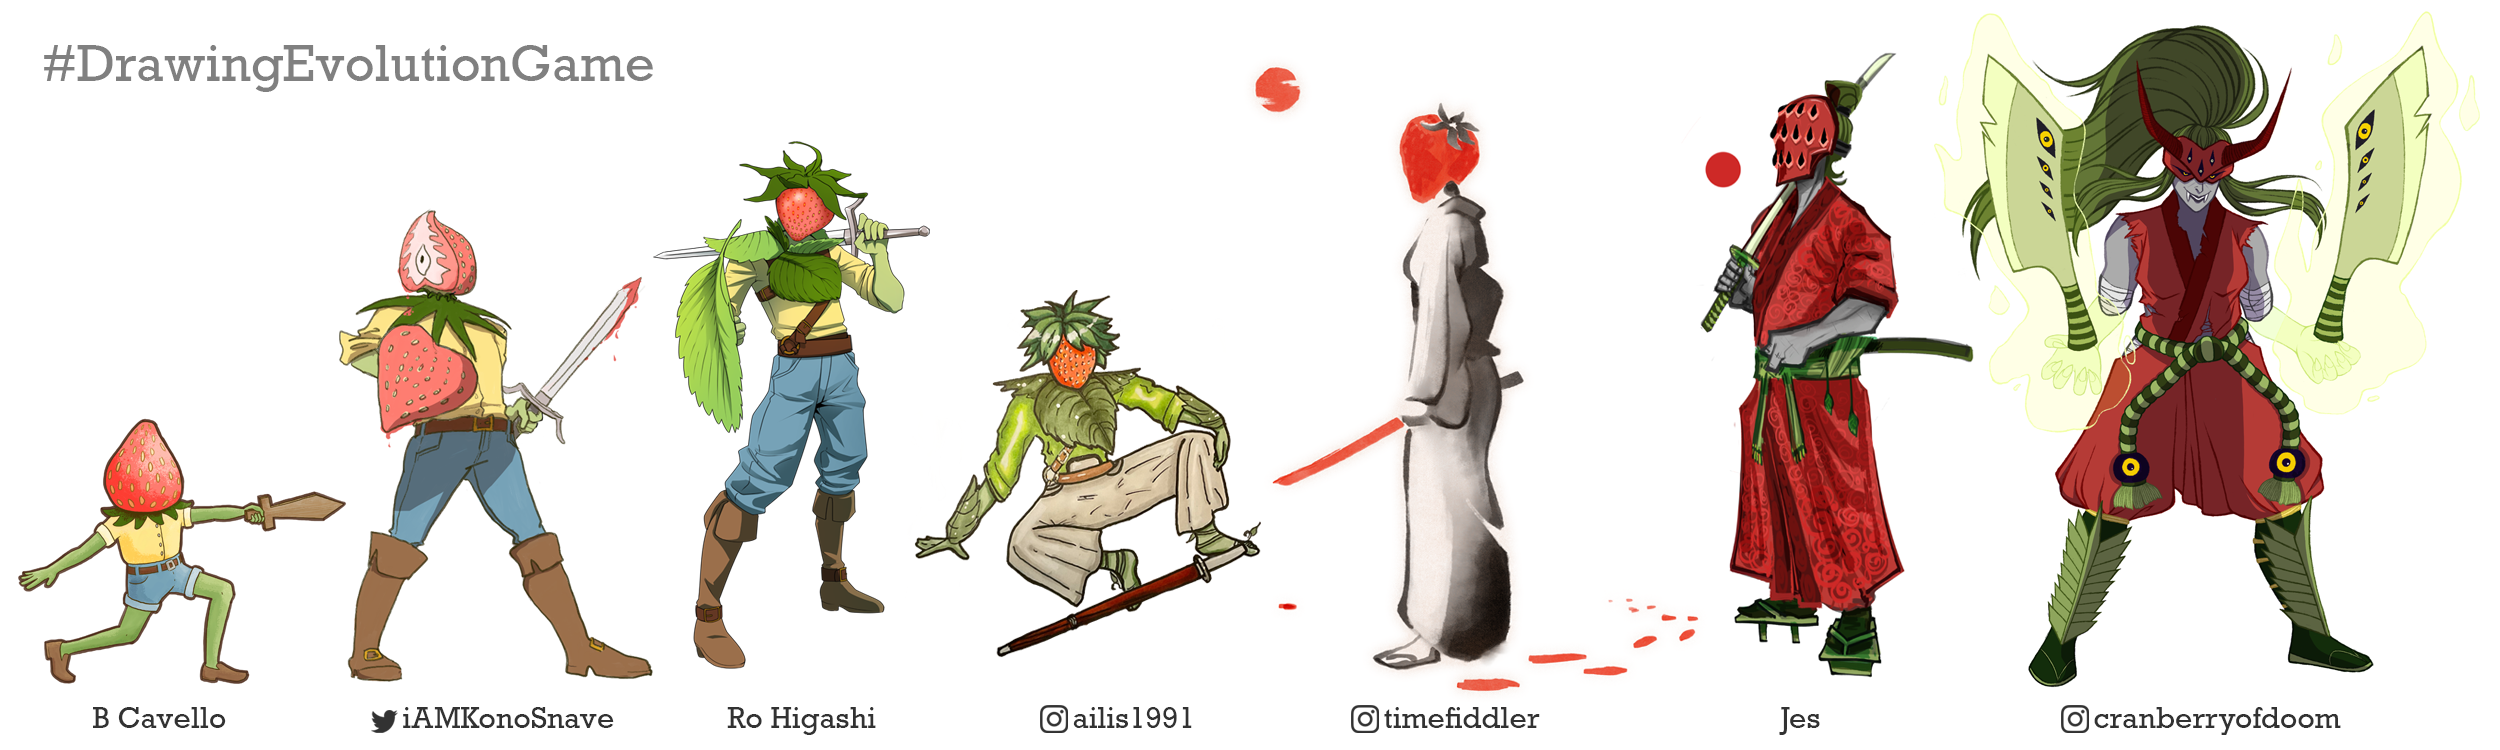 Evolution of the tiny strawberry-headed starter seed wielding a wooden sword into an armless double-cleaver wielding sorcerer